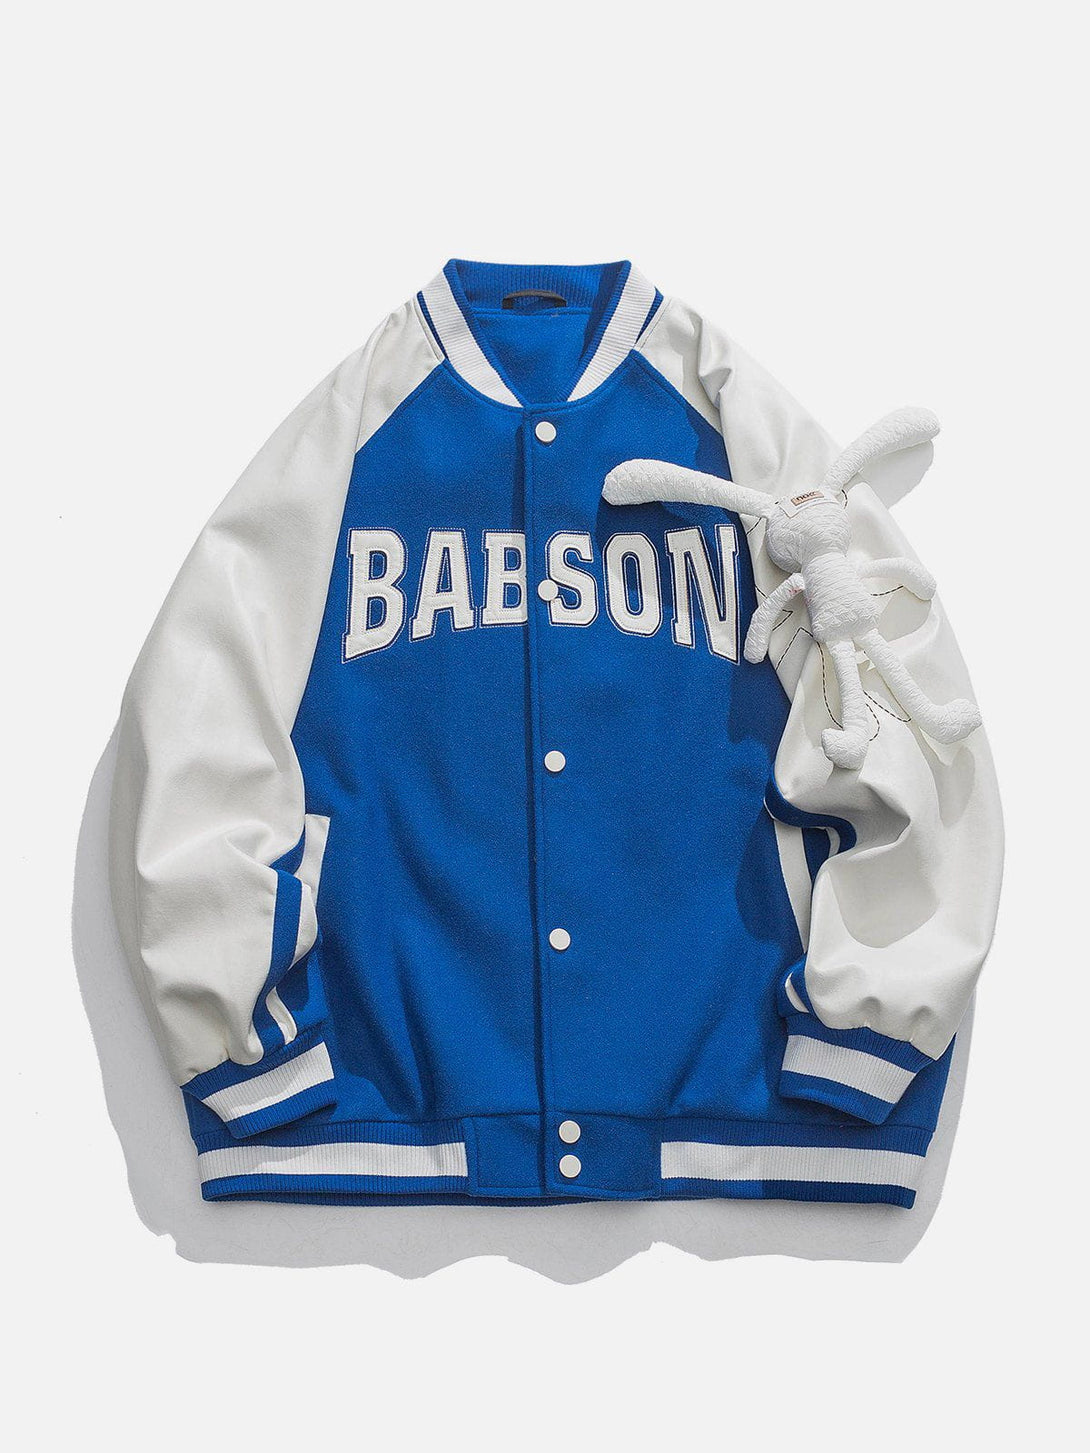 Levefly - "BABSON" Print Jacket - Streetwear Fashion - levefly.com